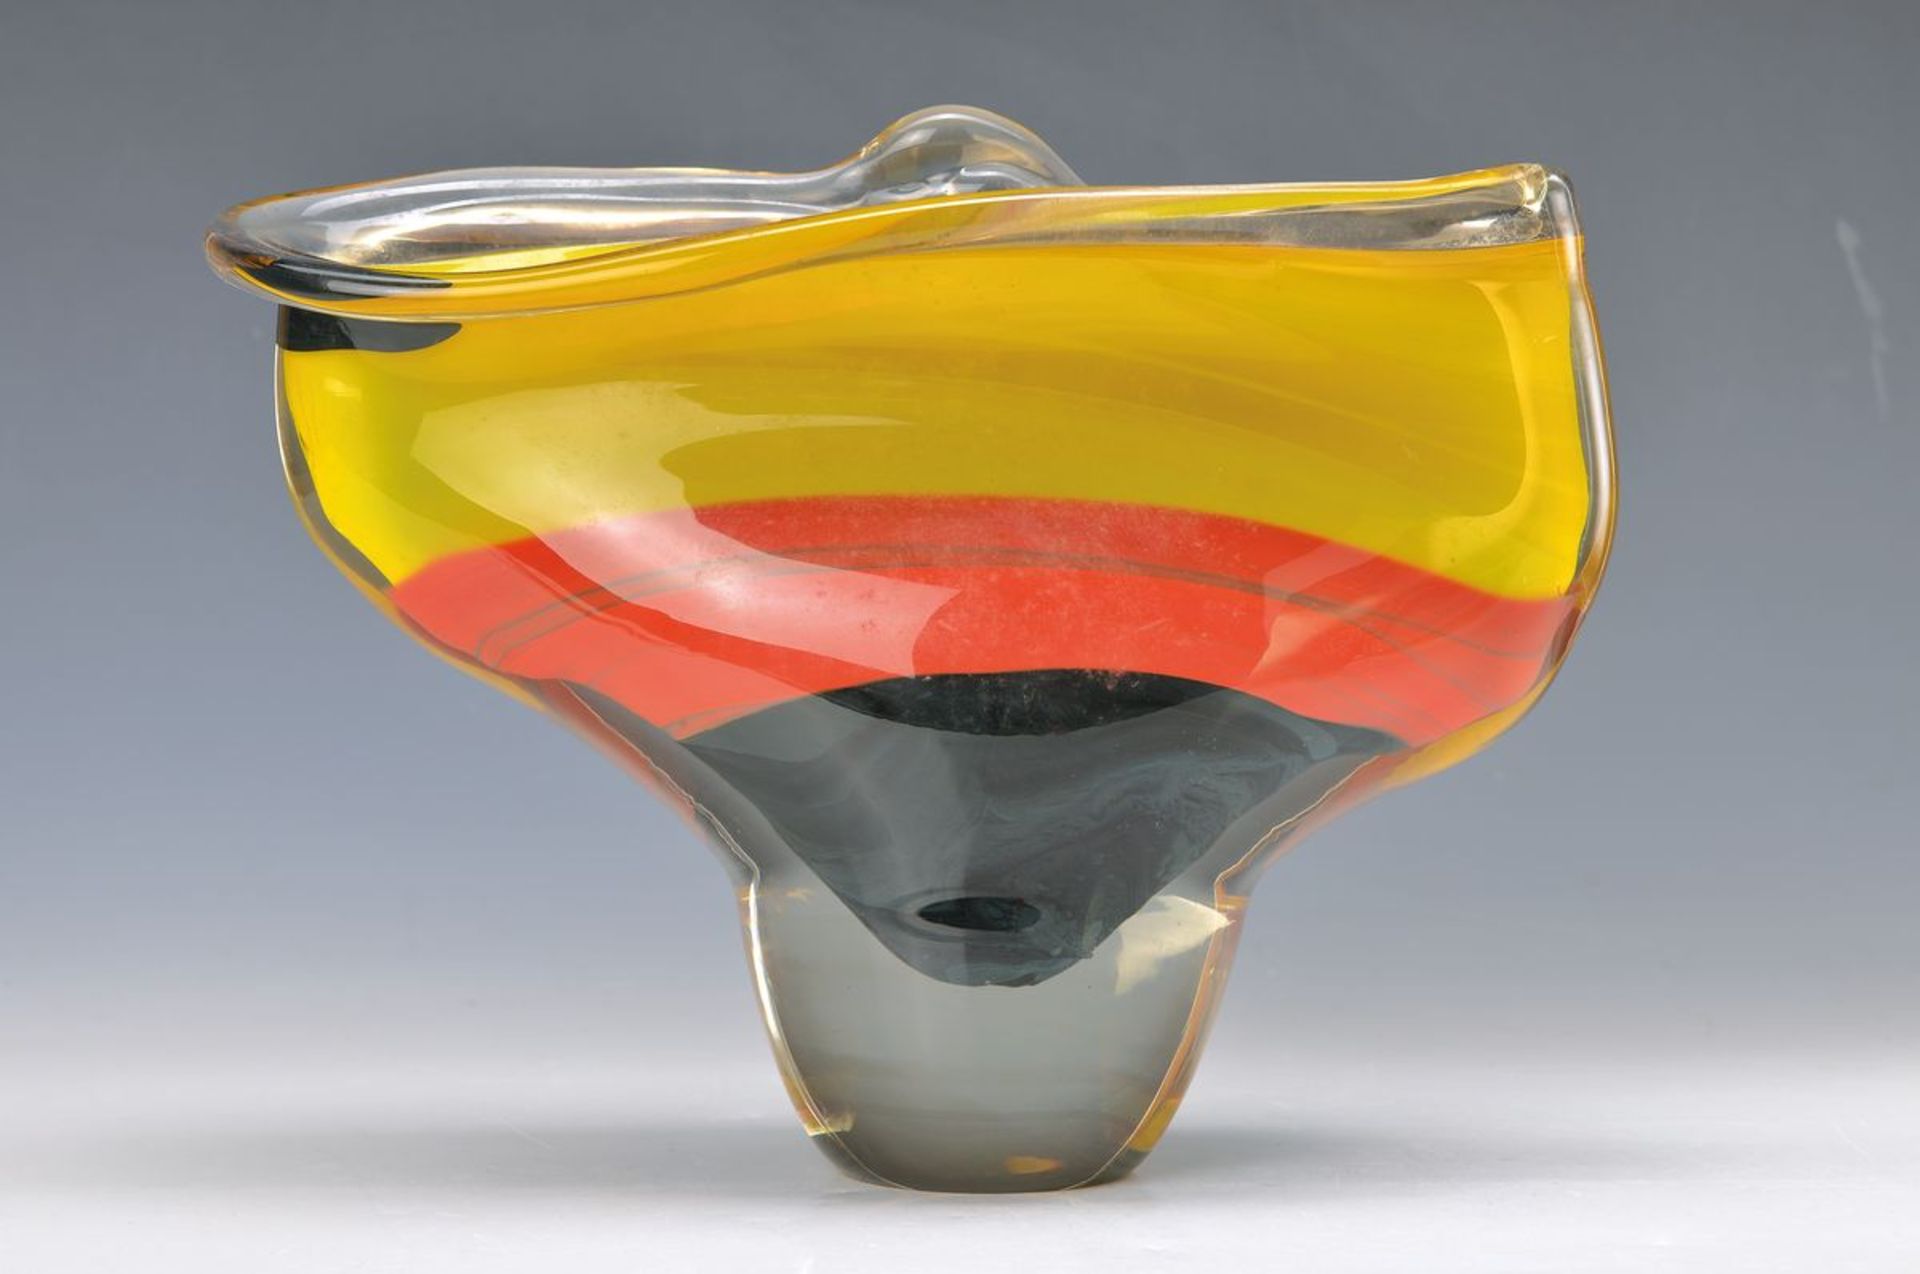 vase, Murano Italy, 1970s, thick-walled blown glass with inside in yellow, red and black opaque,